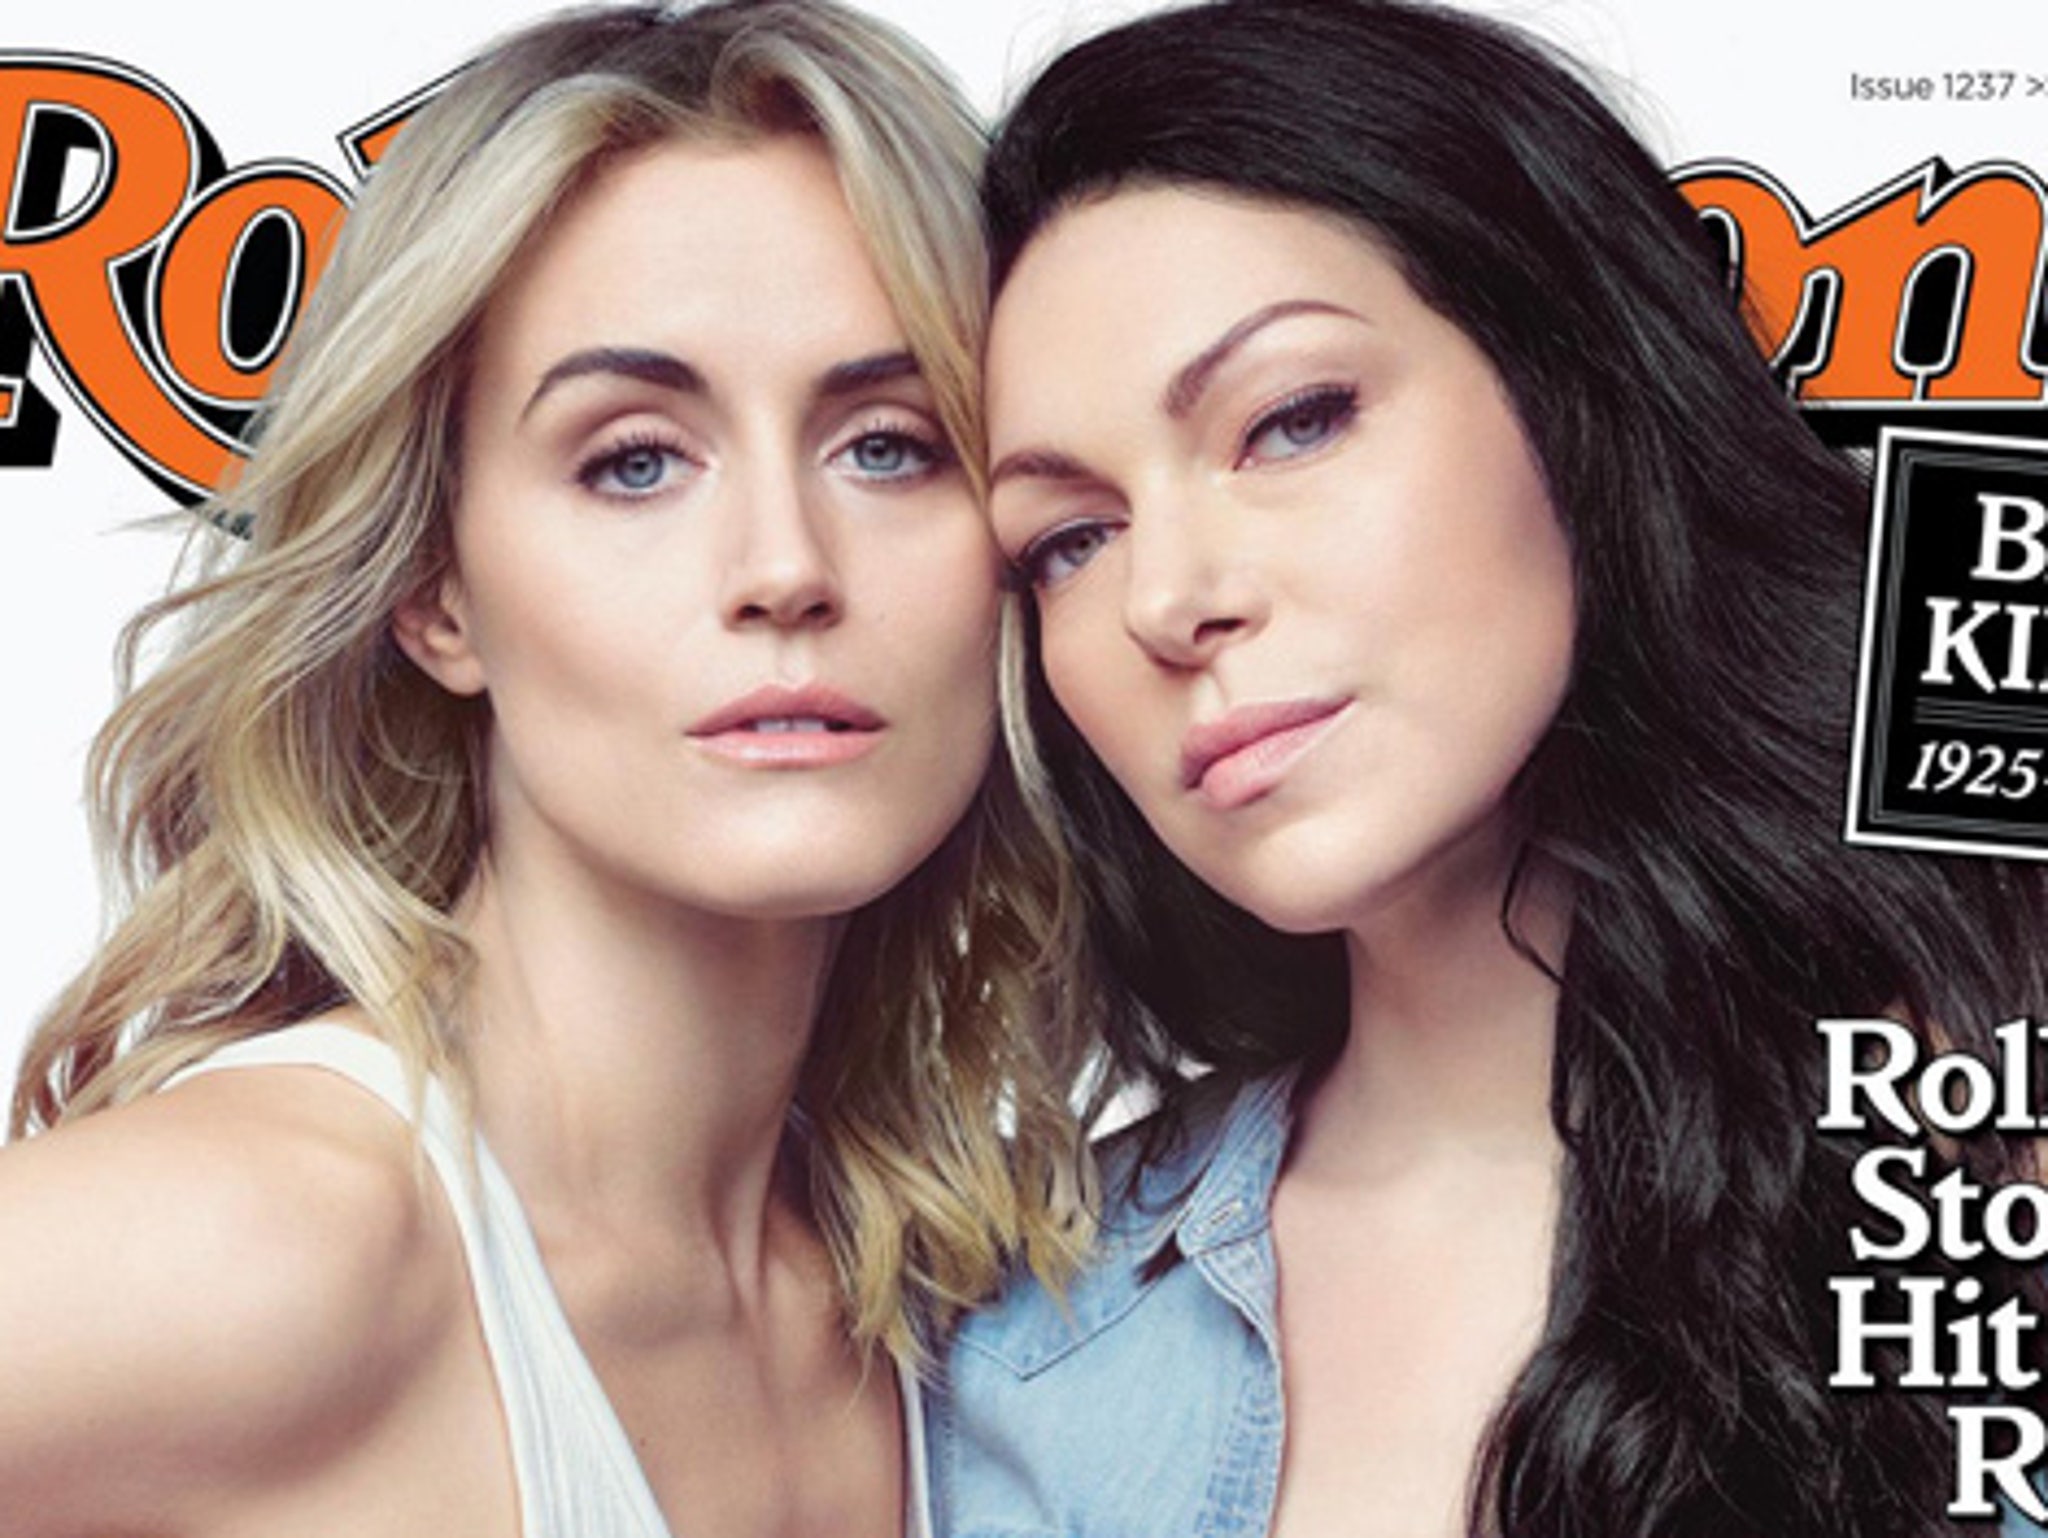 Orange Is the New Black' Stars Cover ESSENCE's July Cover